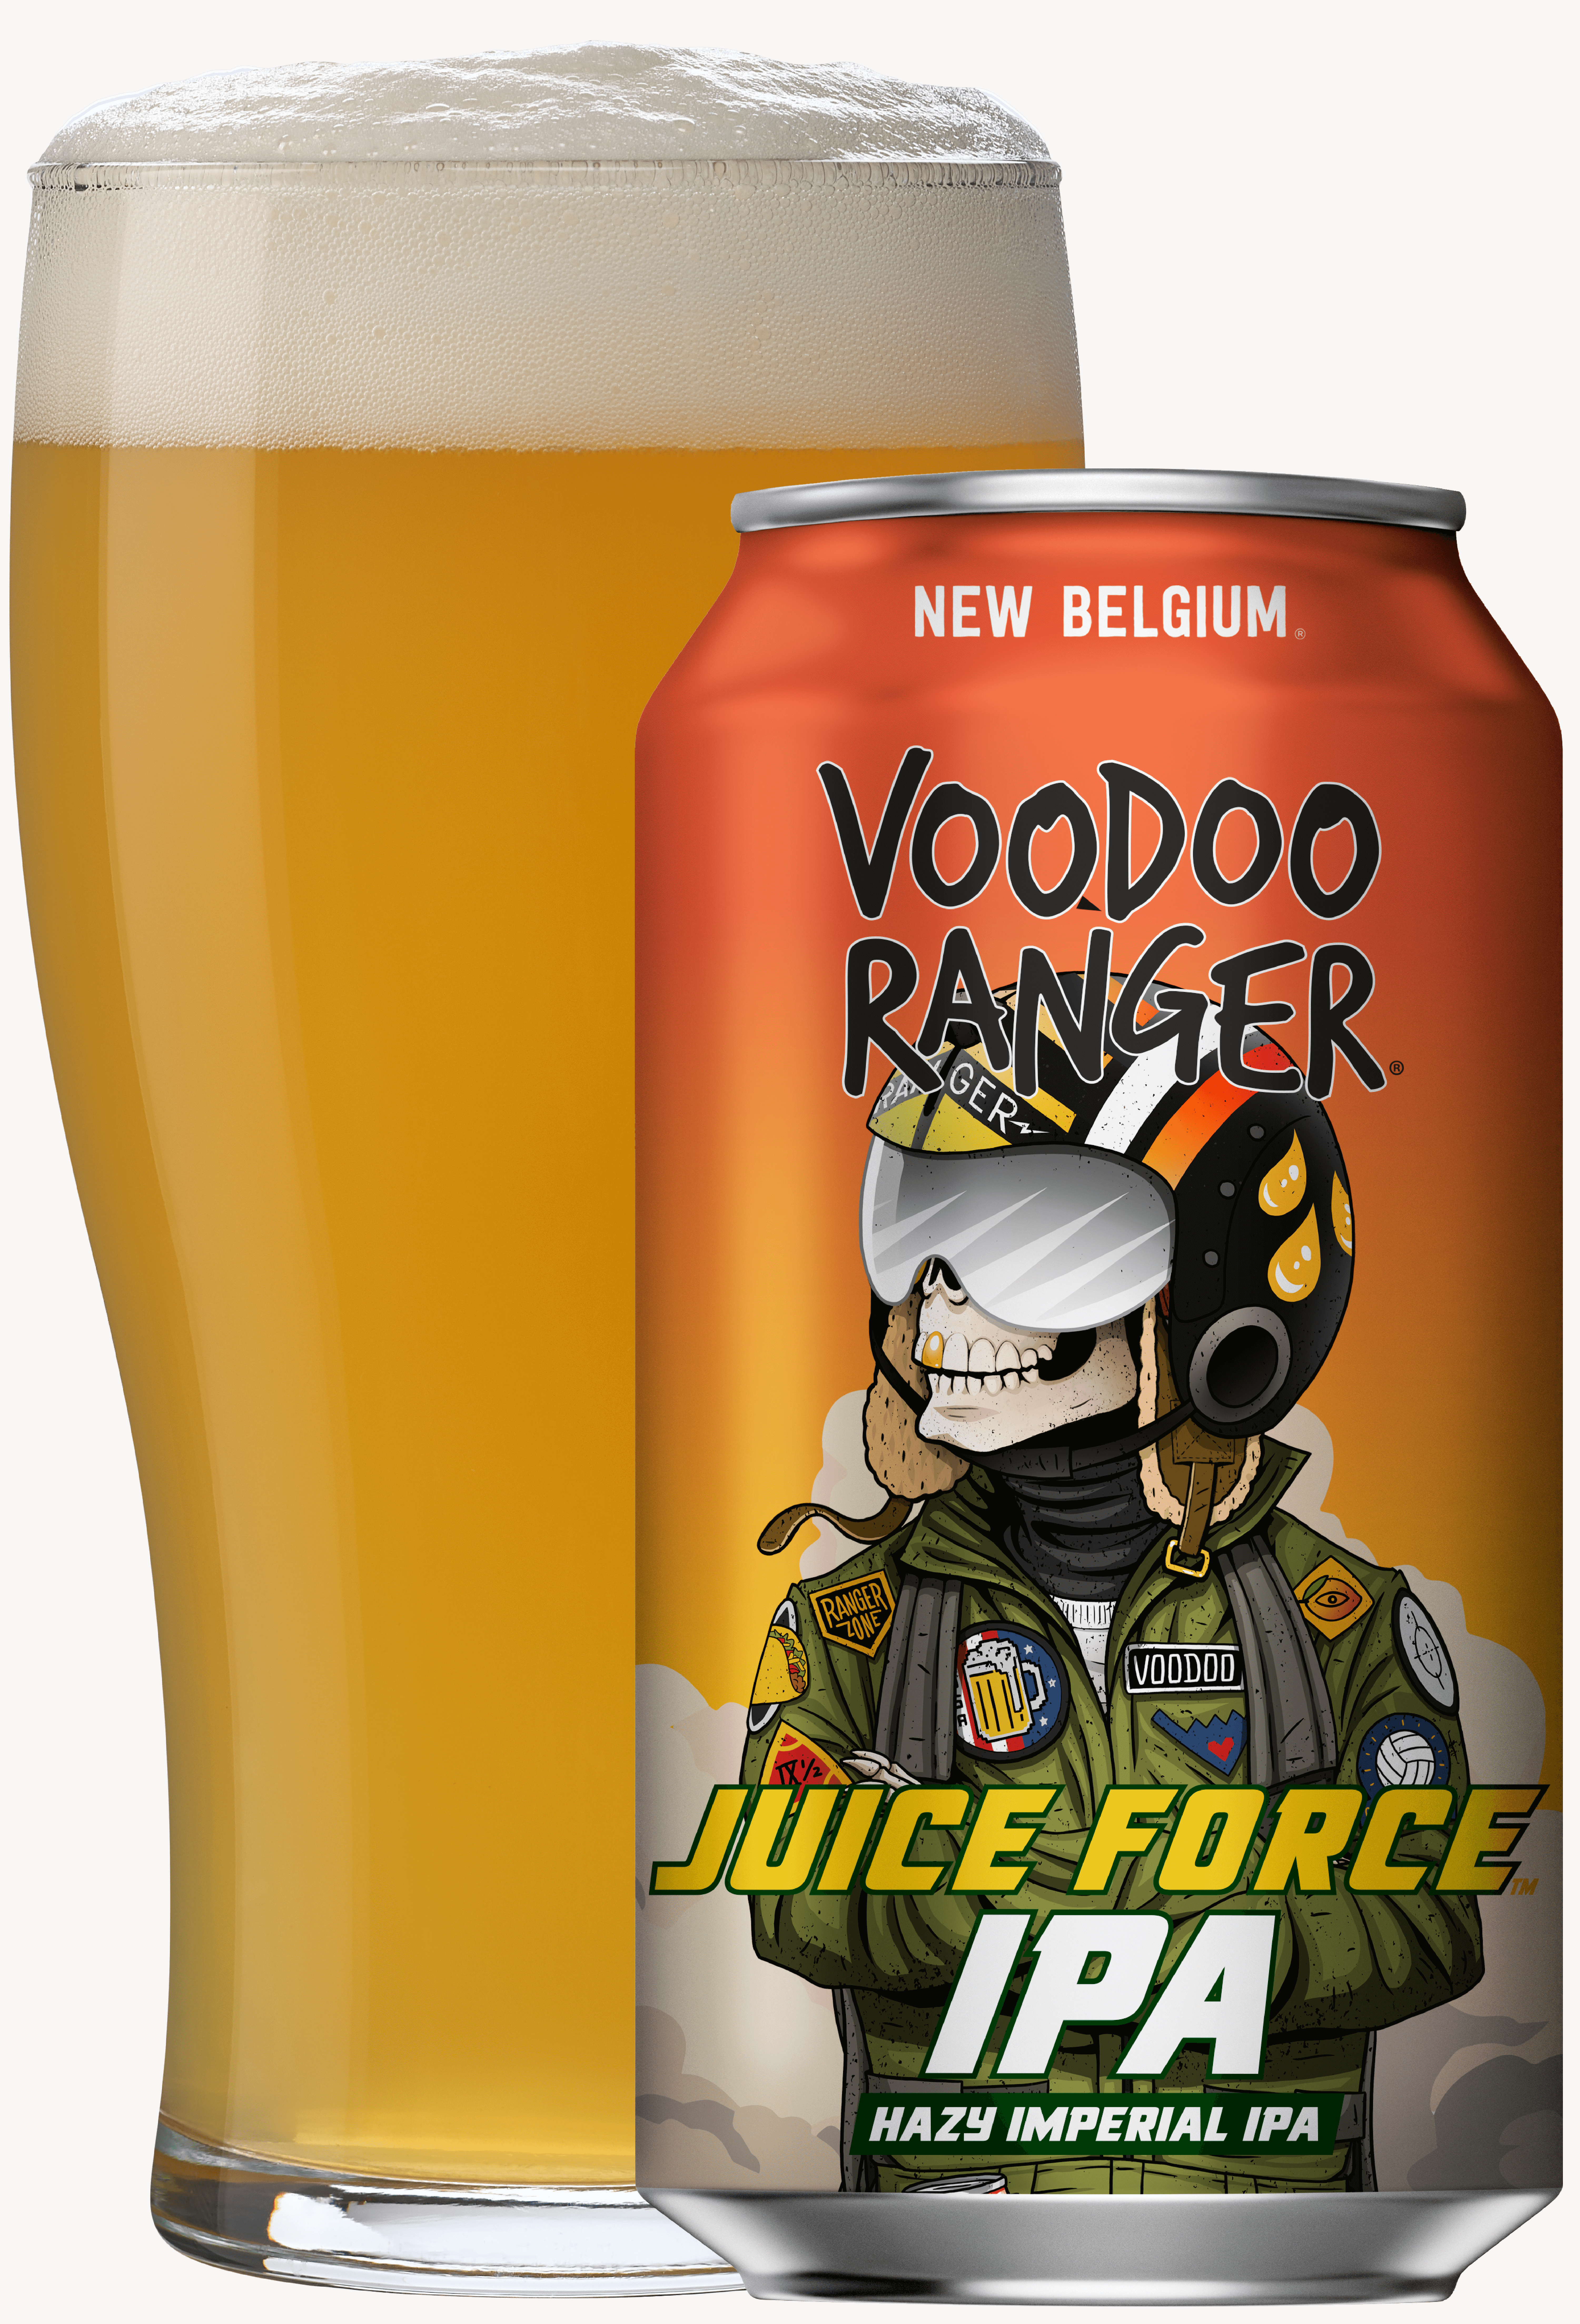 Voodoo Ranger Juice Force beer can and glass filled with beer